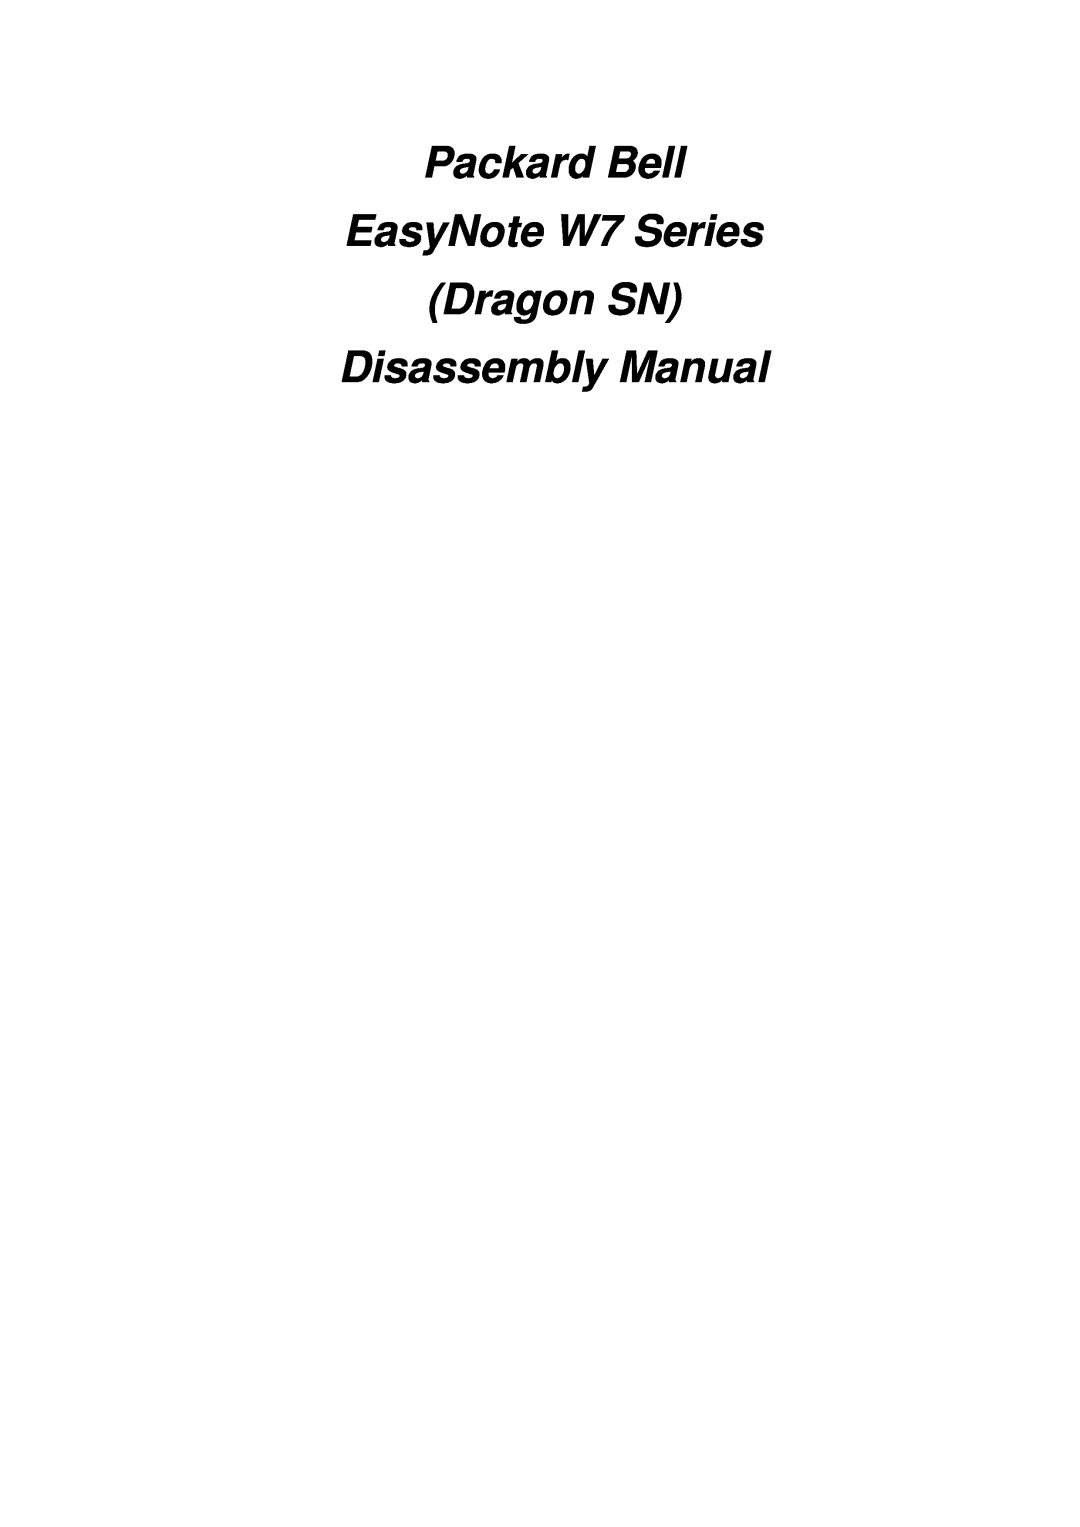 Packard Bell manual Packard Bell EasyNote W7 Series Dragon SN Disassembly Manual 